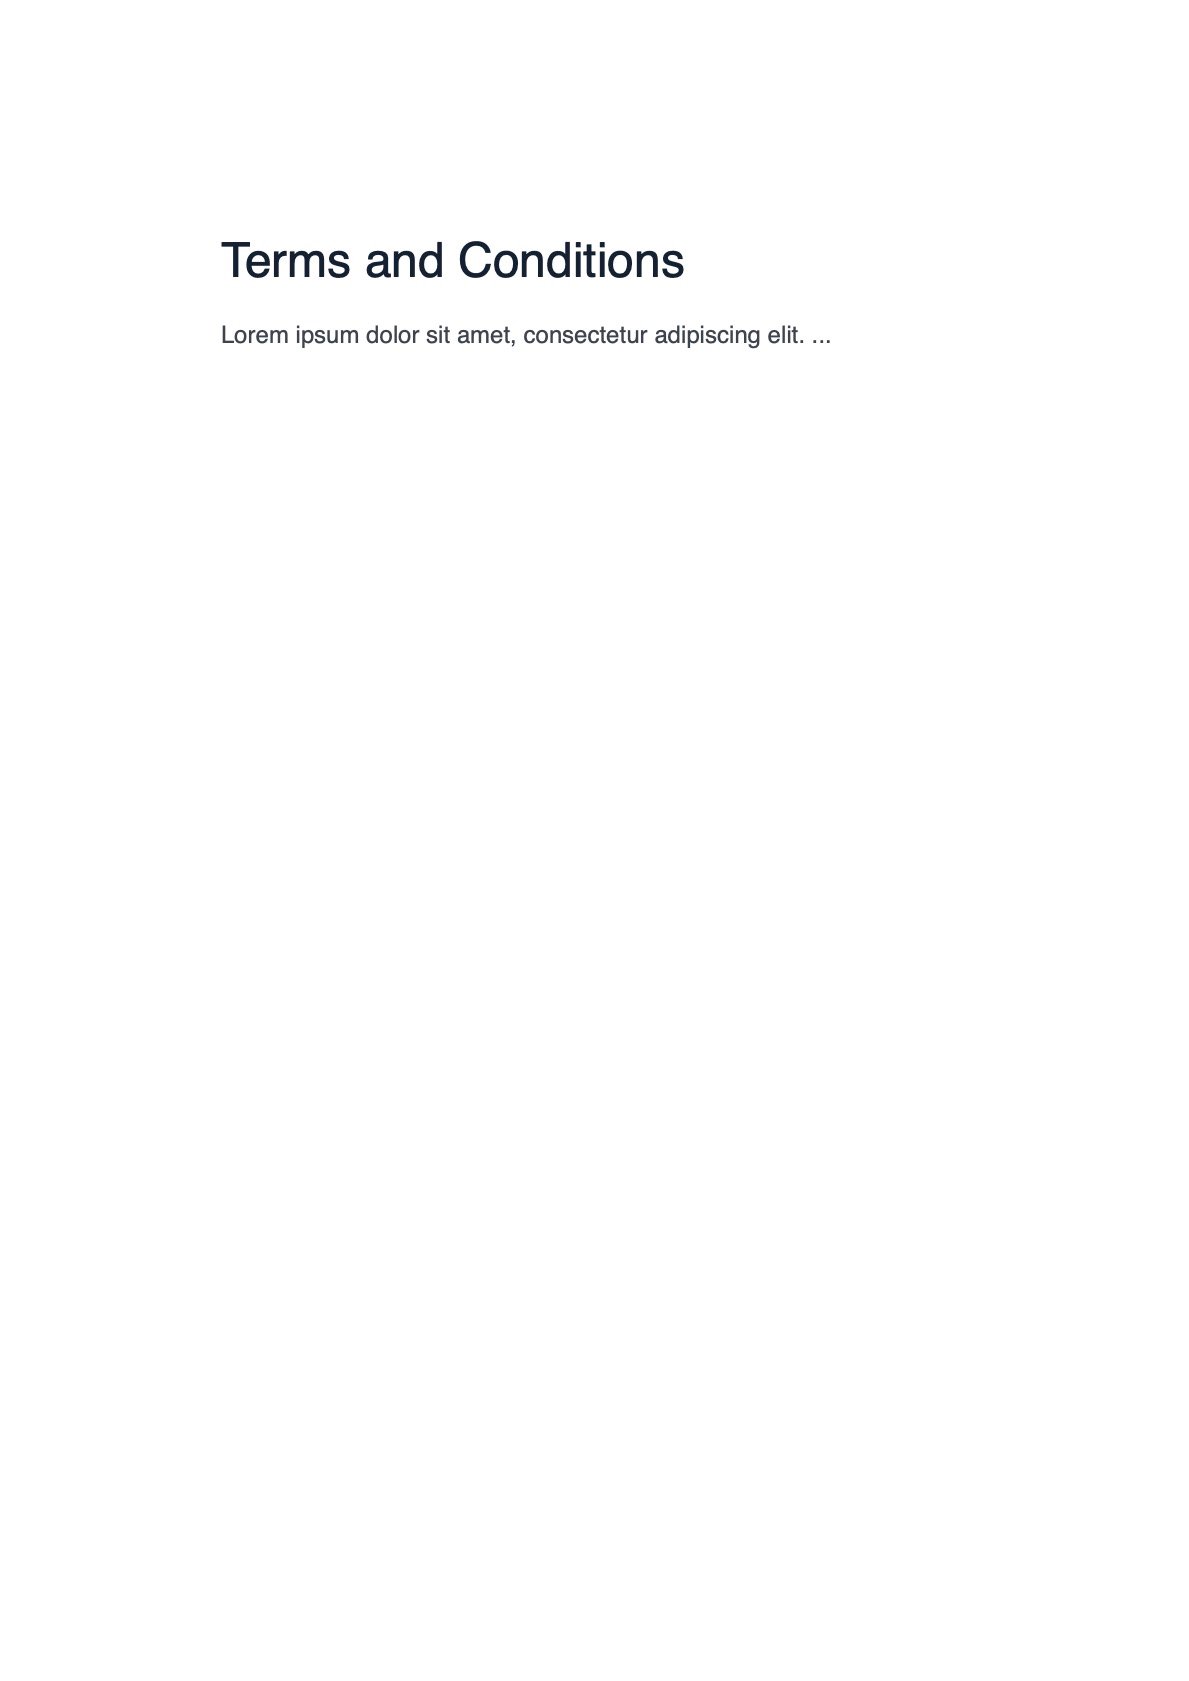 Generated Terms and Conditions